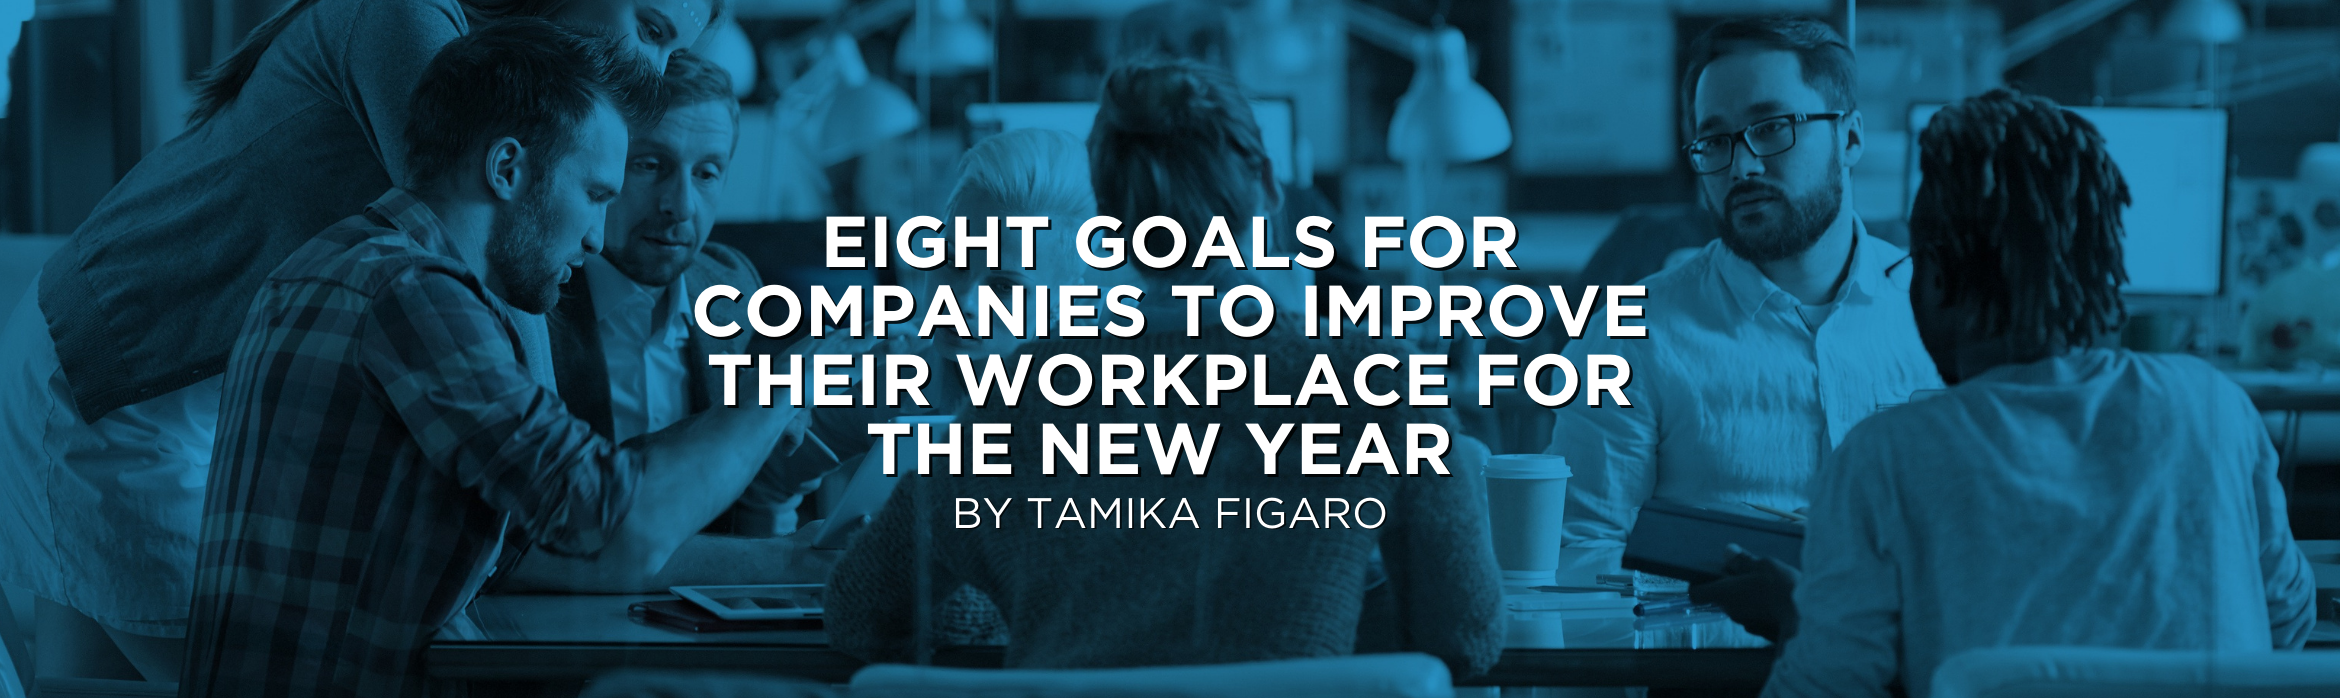 Eight goals for companies to improve their workplace for the new year